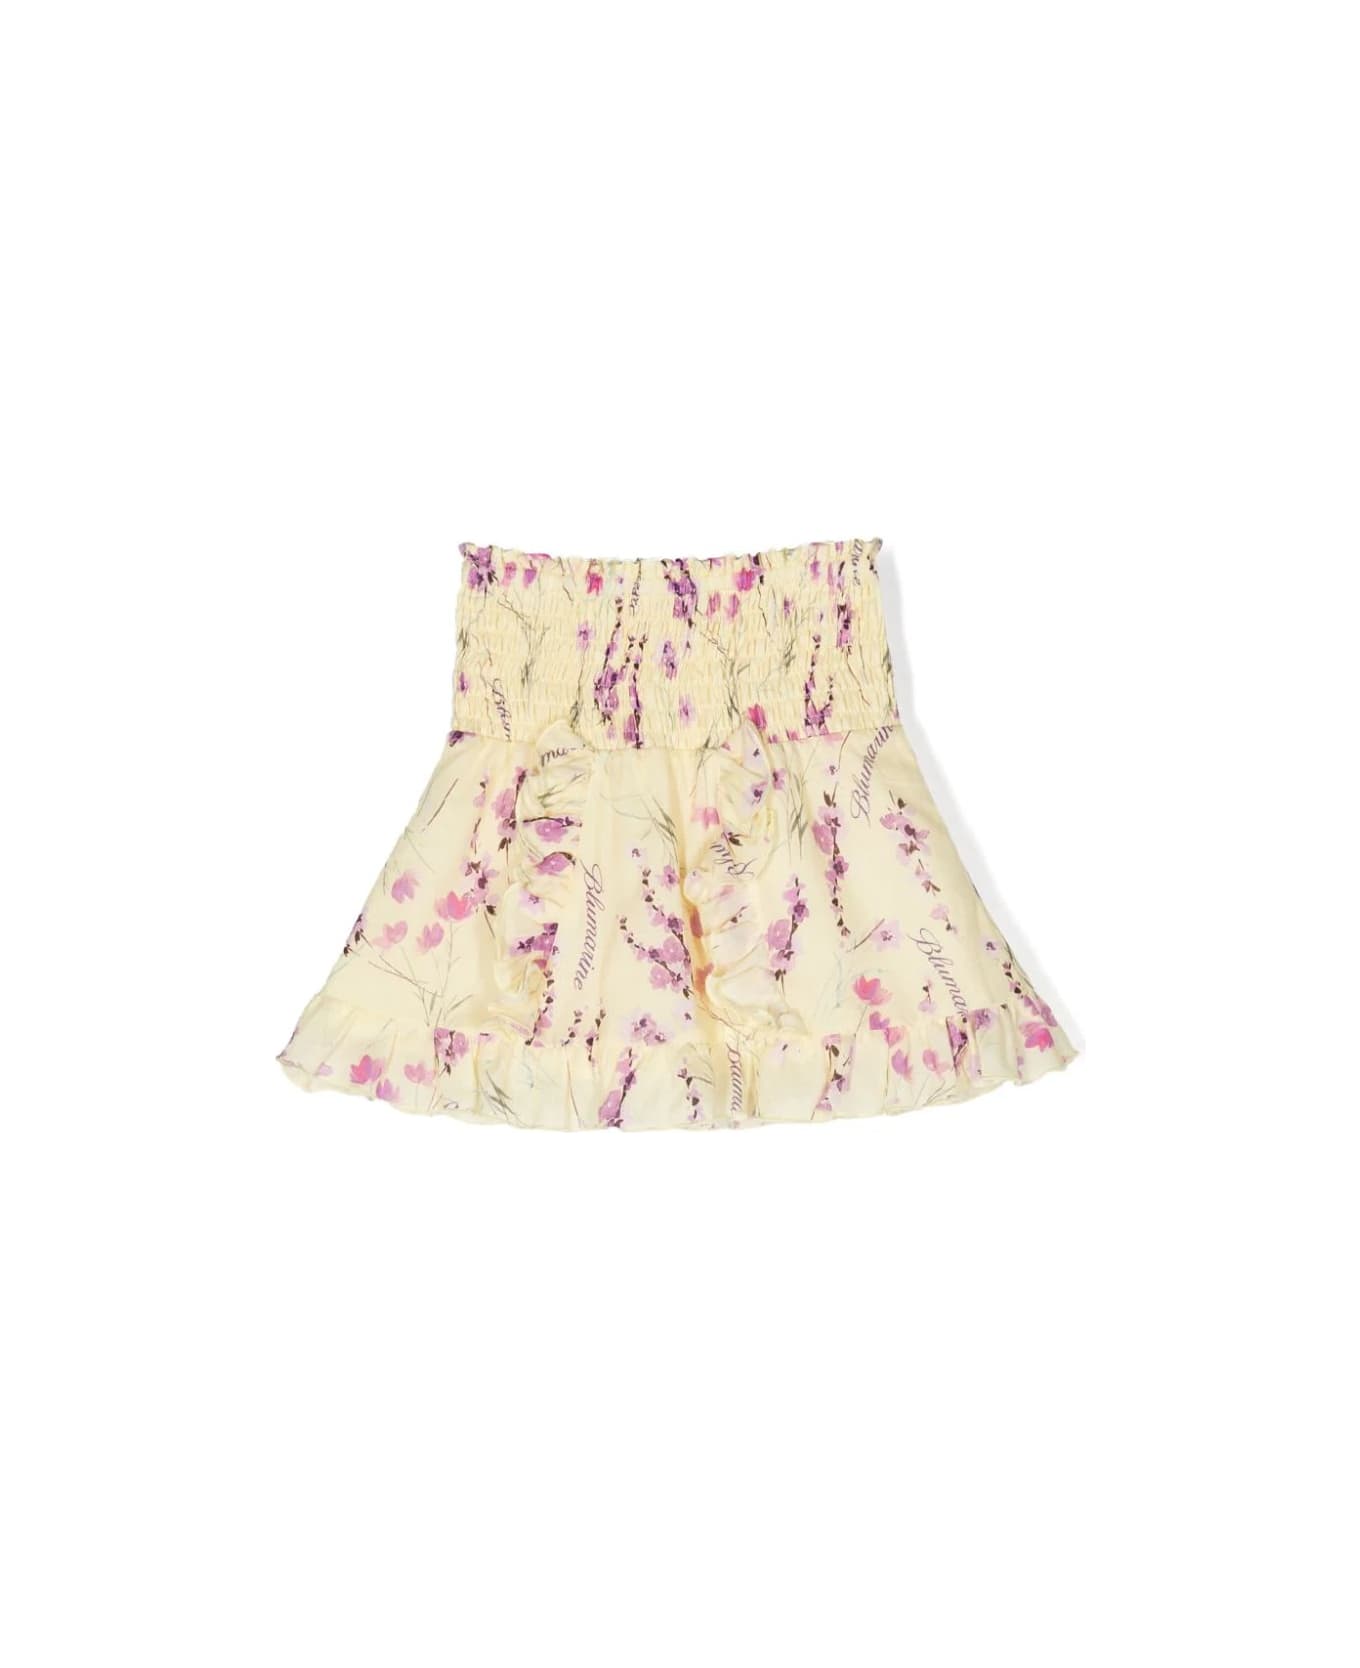 Miss Blumarine Pastel Yellow Miniskirt With Ruffles And Floral Print - Giallo